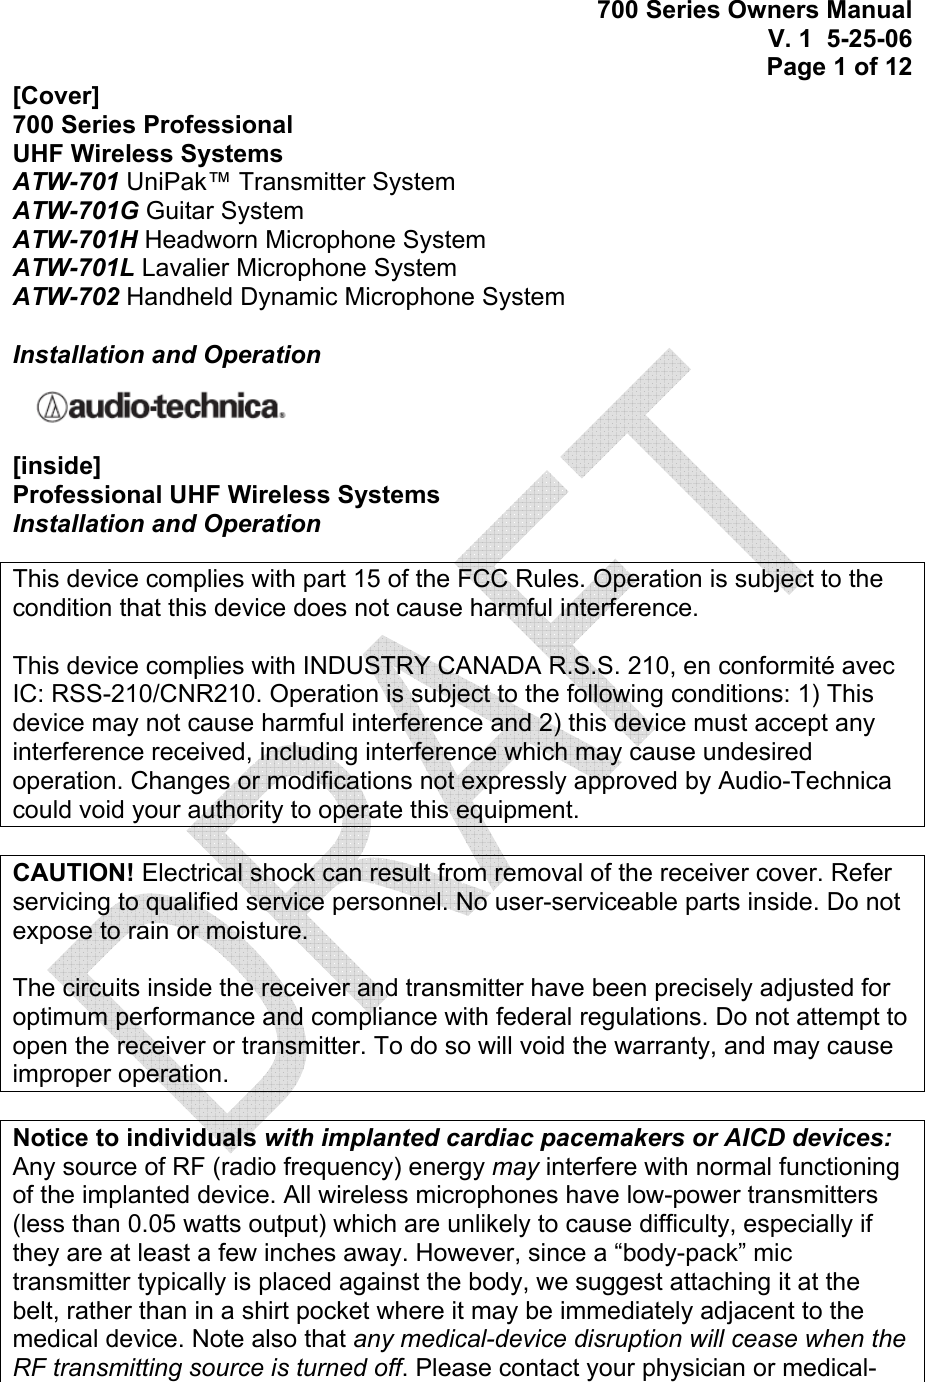 700 Series Owners Manual V. 1  5-25-06 Page 1 of 12  [Cover] 700 Series Professional  UHF Wireless Systems ATW-701 UniPak™ Transmitter System ATW-701G Guitar System ATW-701H Headworn Microphone System ATW-701L Lavalier Microphone System ATW-702 Handheld Dynamic Microphone System  Installation and Operation  [inside] Professional UHF Wireless Systems Installation and Operation  This device complies with part 15 of the FCC Rules. Operation is subject to the condition that this device does not cause harmful interference.  This device complies with INDUSTRY CANADA R.S.S. 210, en conformité avec IC: RSS-210/CNR210. Operation is subject to the following conditions: 1) This device may not cause harmful interference and 2) this device must accept any interference received, including interference which may cause undesired operation. Changes or modifications not expressly approved by Audio-Technica could void your authority to operate this equipment.  CAUTION! Electrical shock can result from removal of the receiver cover. Refer servicing to qualified service personnel. No user-serviceable parts inside. Do not expose to rain or moisture.  The circuits inside the receiver and transmitter have been precisely adjusted for optimum performance and compliance with federal regulations. Do not attempt to open the receiver or transmitter. To do so will void the warranty, and may cause improper operation.  Notice to individuals with implanted cardiac pacemakers or AICD devices: Any source of RF (radio frequency) energy may interfere with normal functioning of the implanted device. All wireless microphones have low-power transmitters (less than 0.05 watts output) which are unlikely to cause difficulty, especially if they are at least a few inches away. However, since a “body-pack” mic transmitter typically is placed against the body, we suggest attaching it at the belt, rather than in a shirt pocket where it may be immediately adjacent to the medical device. Note also that any medical-device disruption will cease when the RF transmitting source is turned off. Please contact your physician or medical-